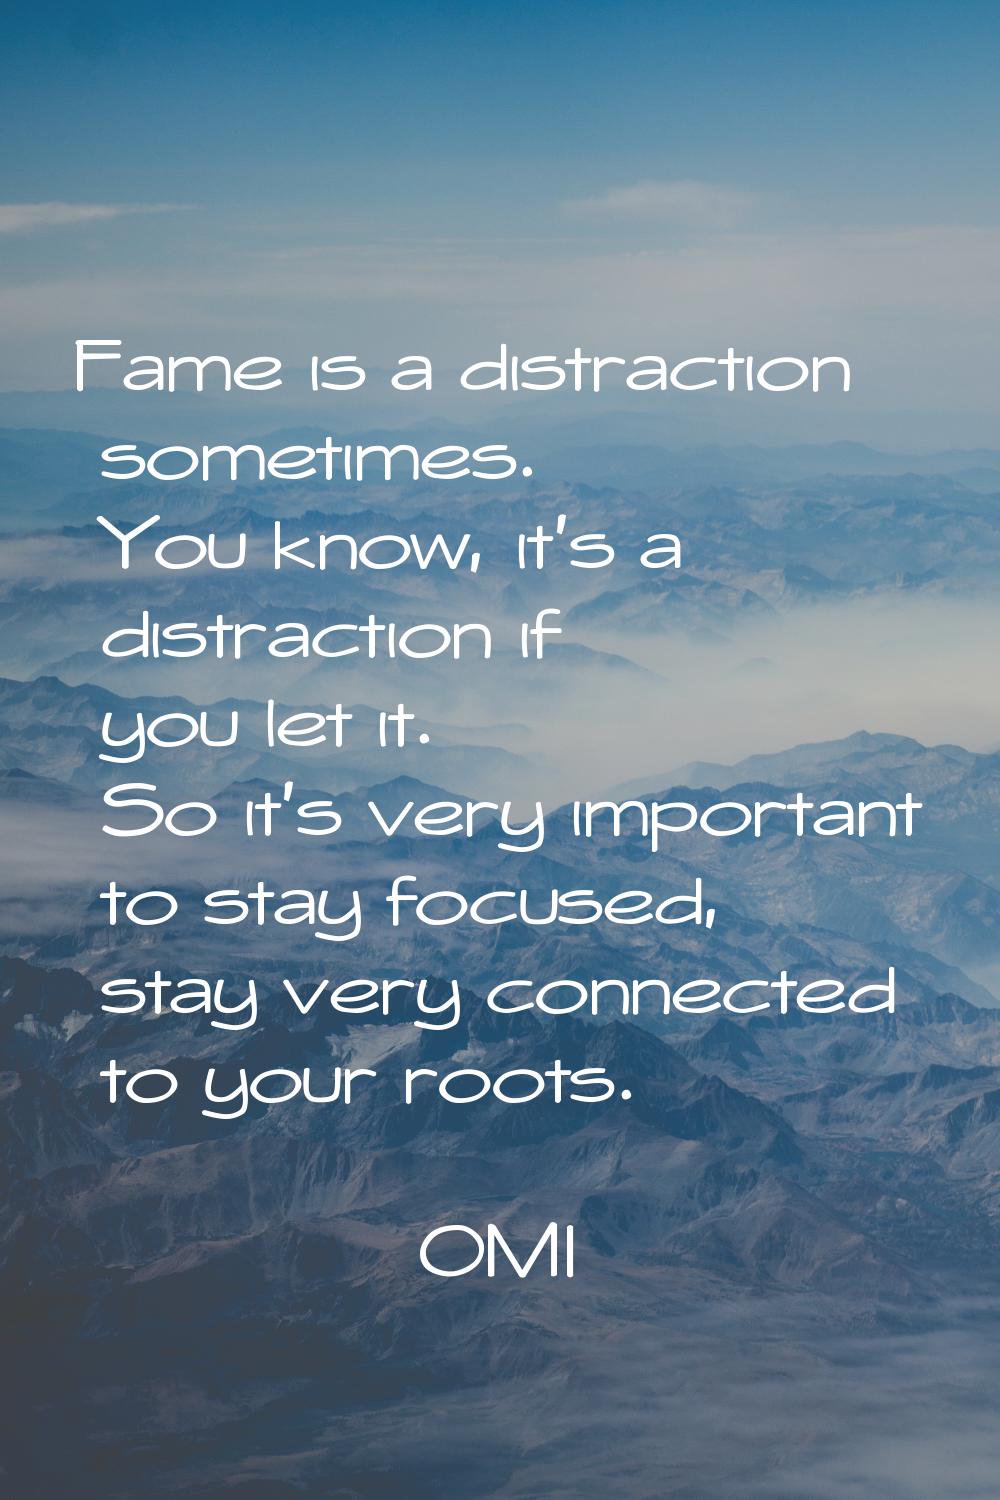 Fame is a distraction sometimes. You know, it's a distraction if you let it. So it's very important